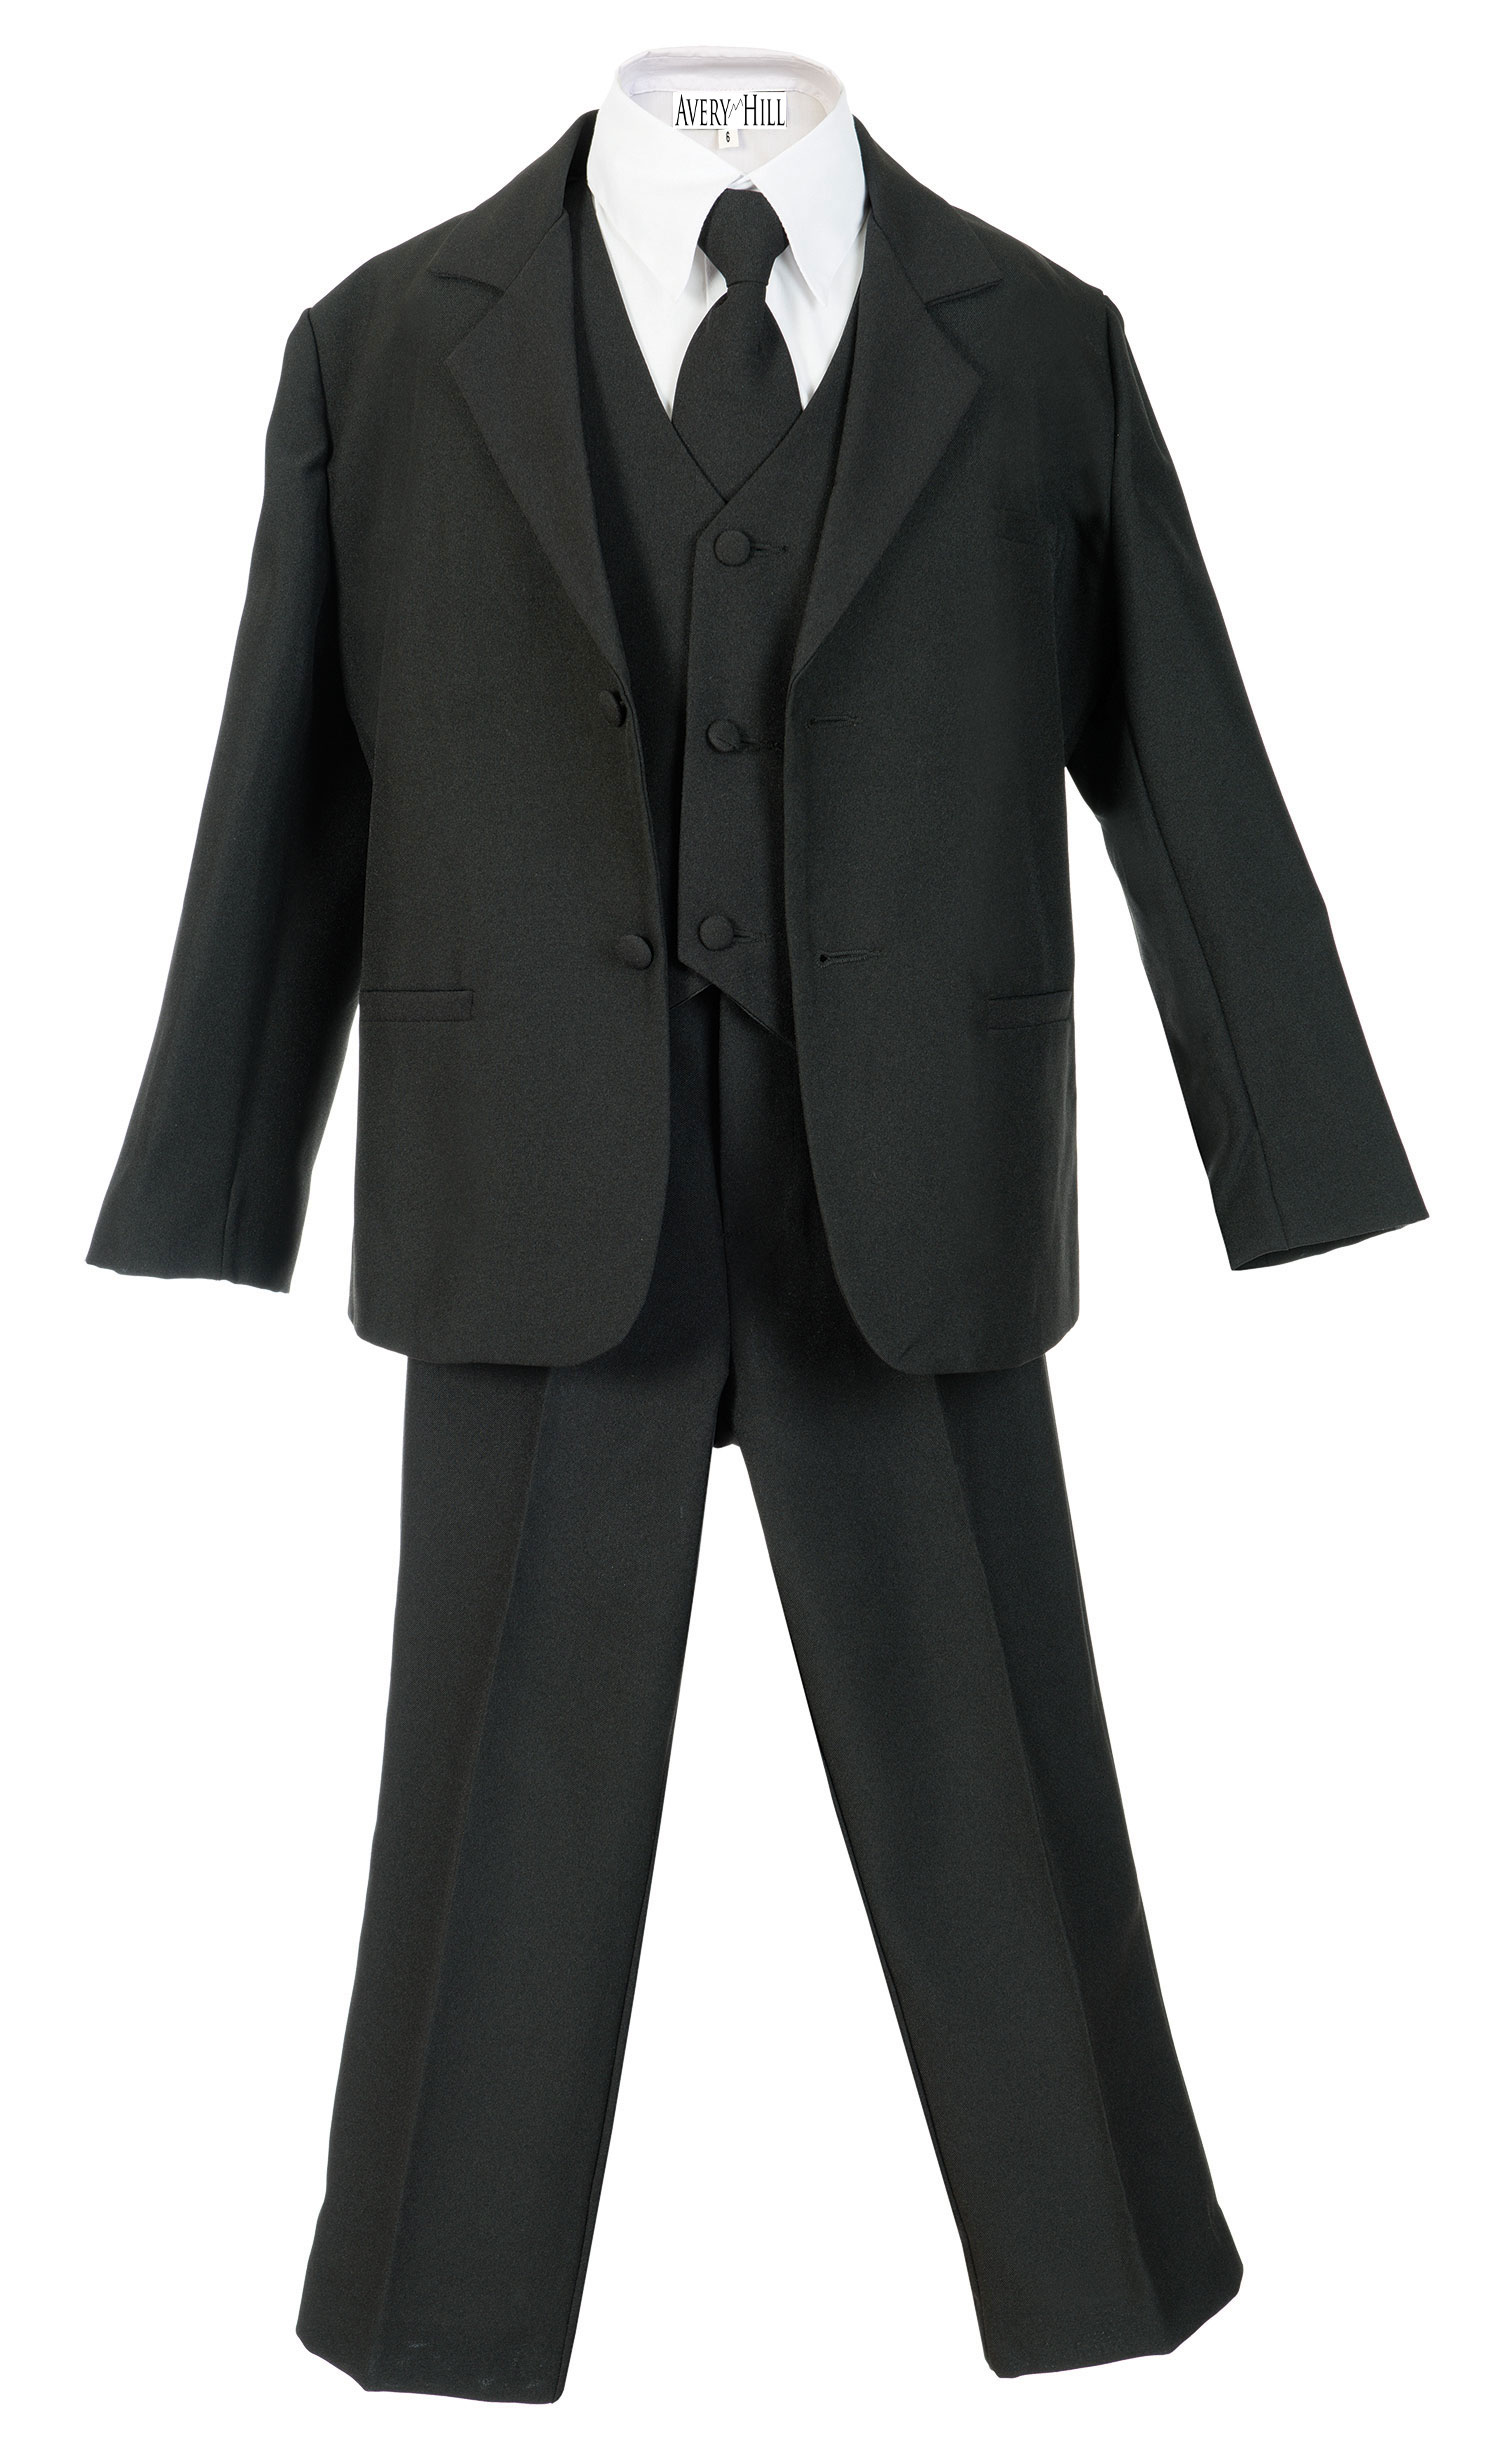 Avery Hill Boys Formal 5 Piece Suit with Shirt and Vest Black - 10